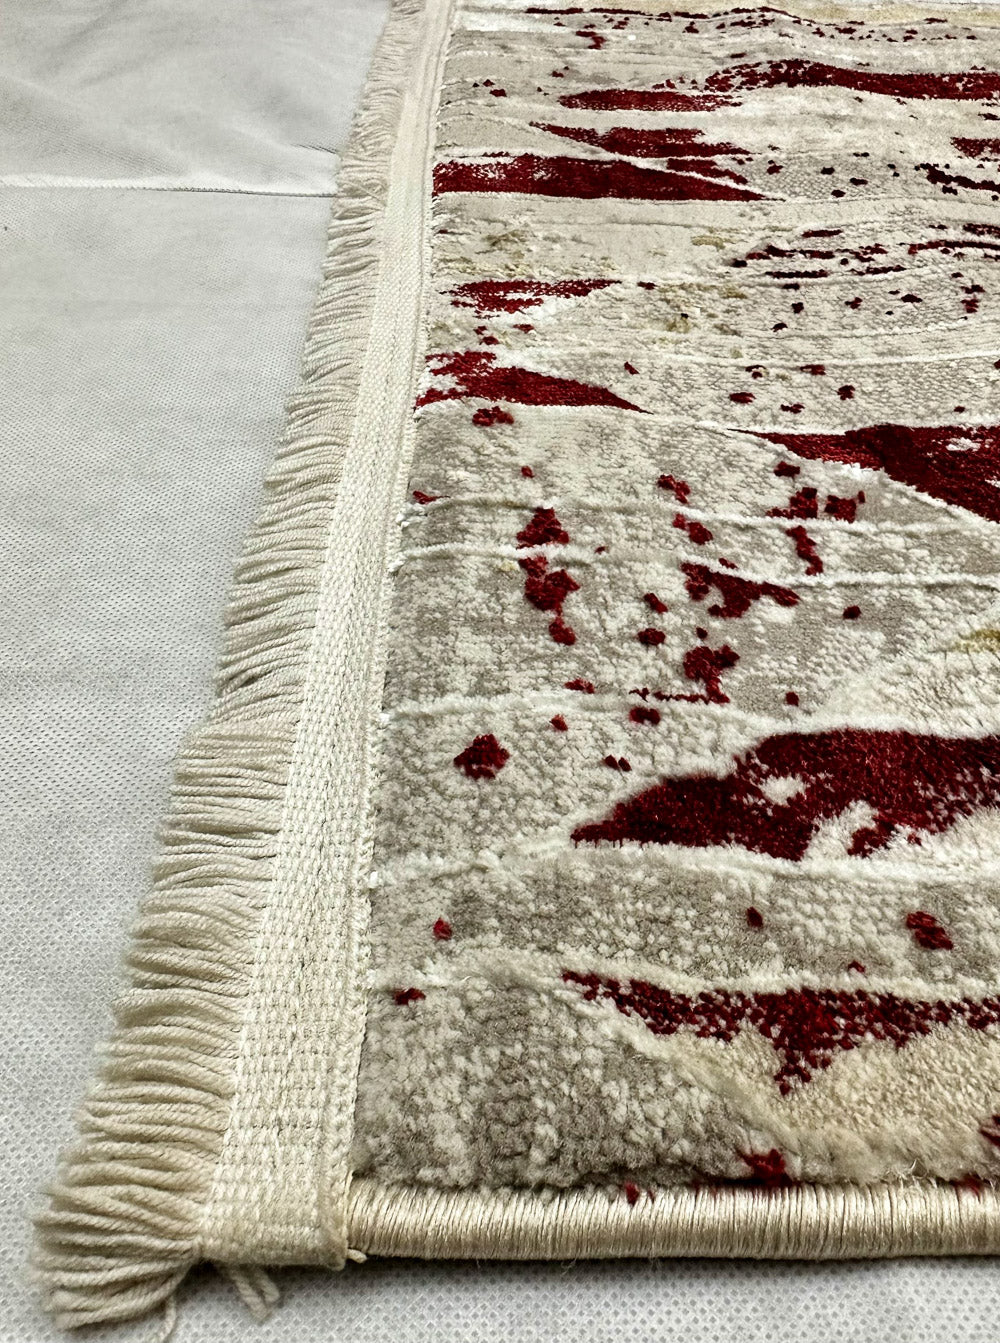 2.5 ft x 10 ft - Runner - Persian - Silky III 6 - Grey and Red Wine